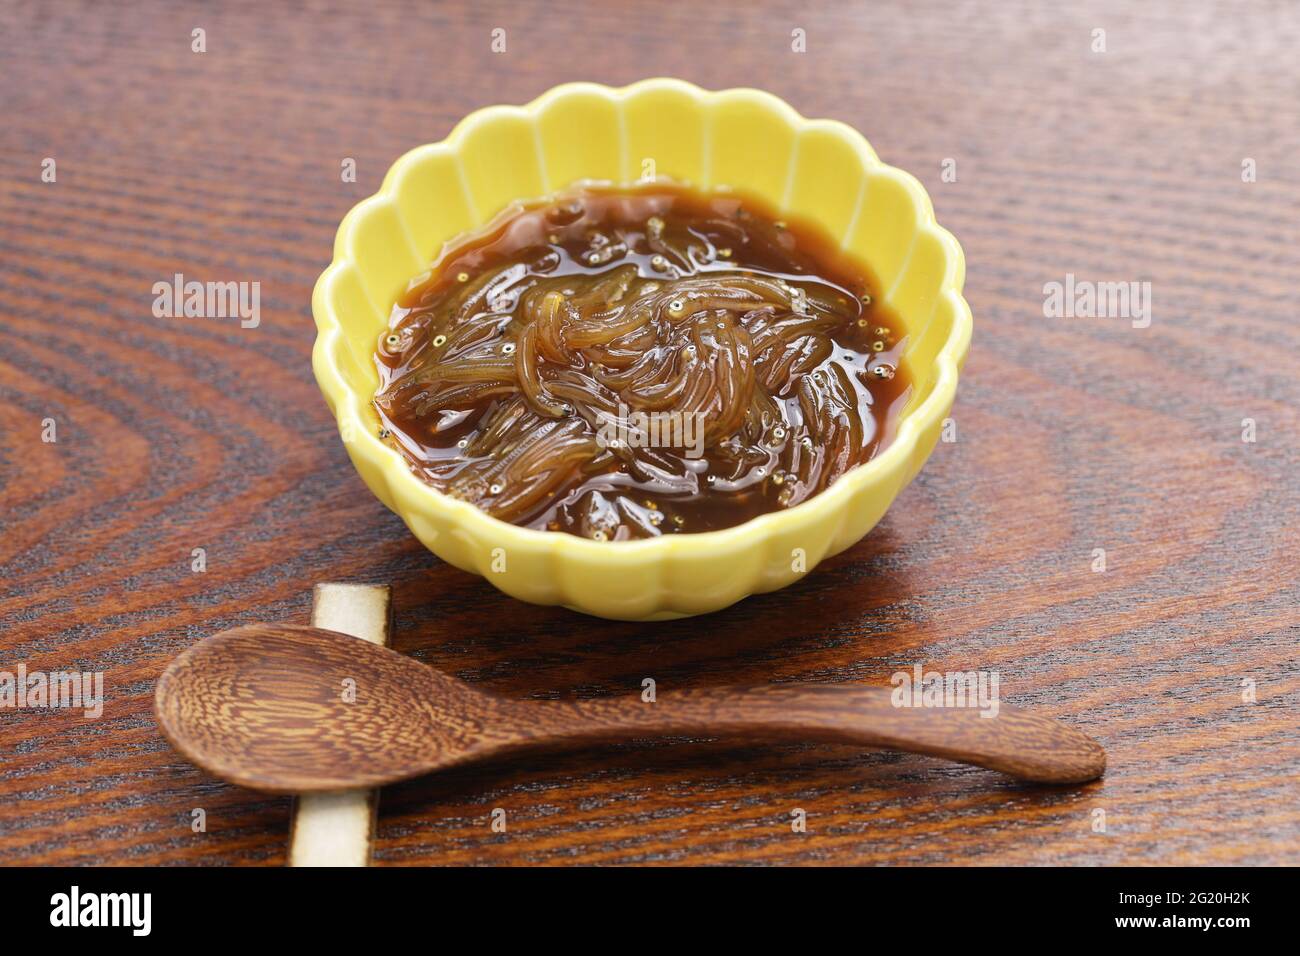 Freshly small fish pickled in soy sauce in a fishing boat. Japanese delicacy food called Sirasu no okizuke. Stock Photo